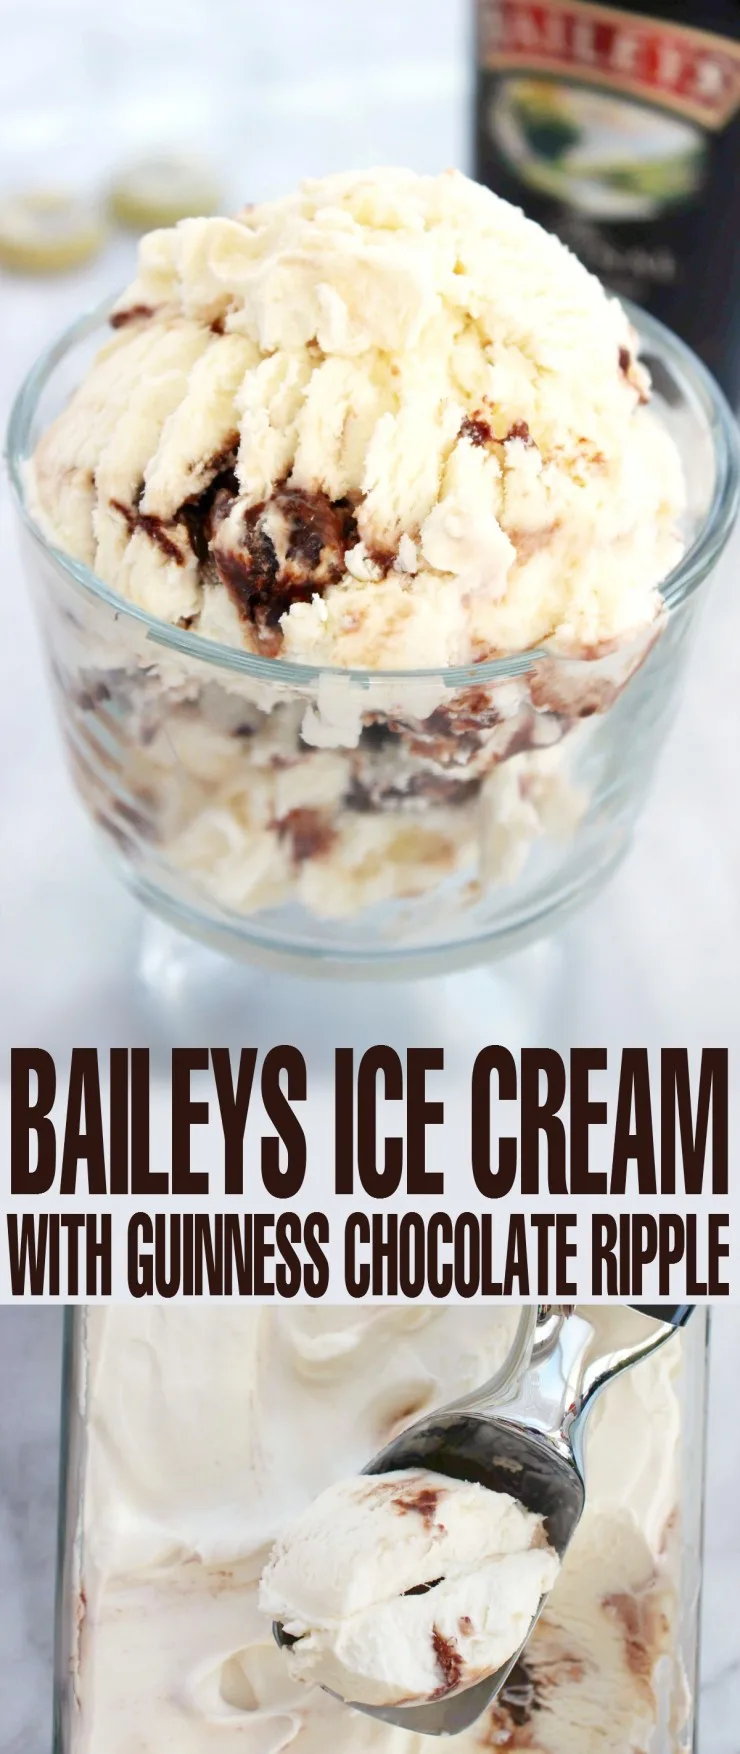 Baileys Ice Cream with Guinness Chocolate Ripple is an indulgent homemade summer or St. Patrick's day dessert for adults!